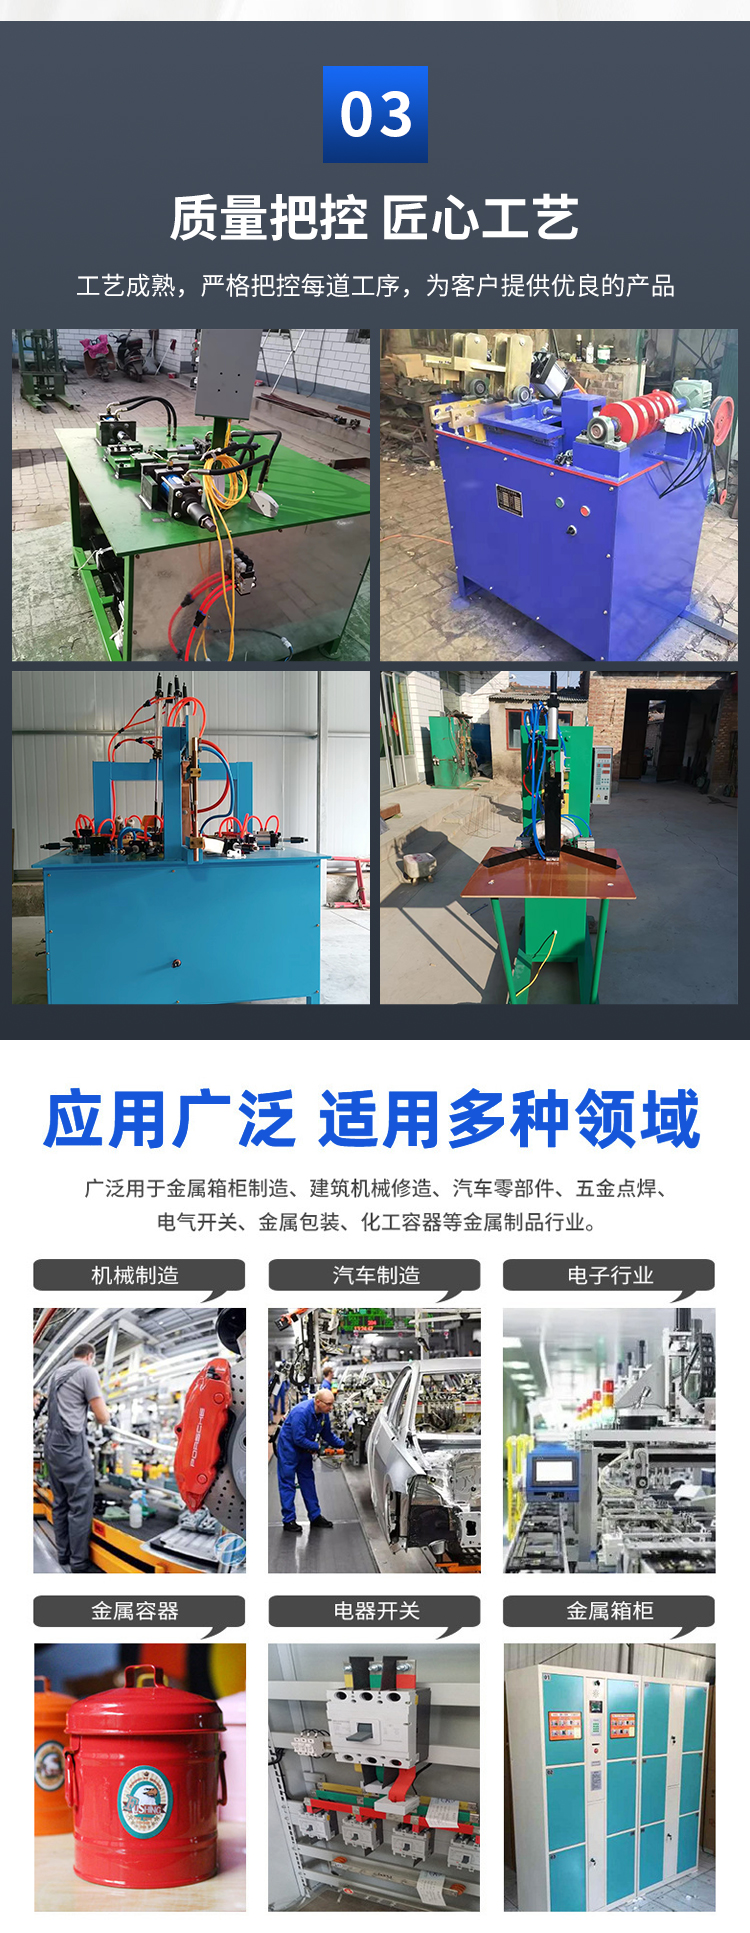 Pneumatic spot welding machine is automatically used for intermediate frequency roller welding machine of frying basket, resistance welding stainless steel seam welding machine